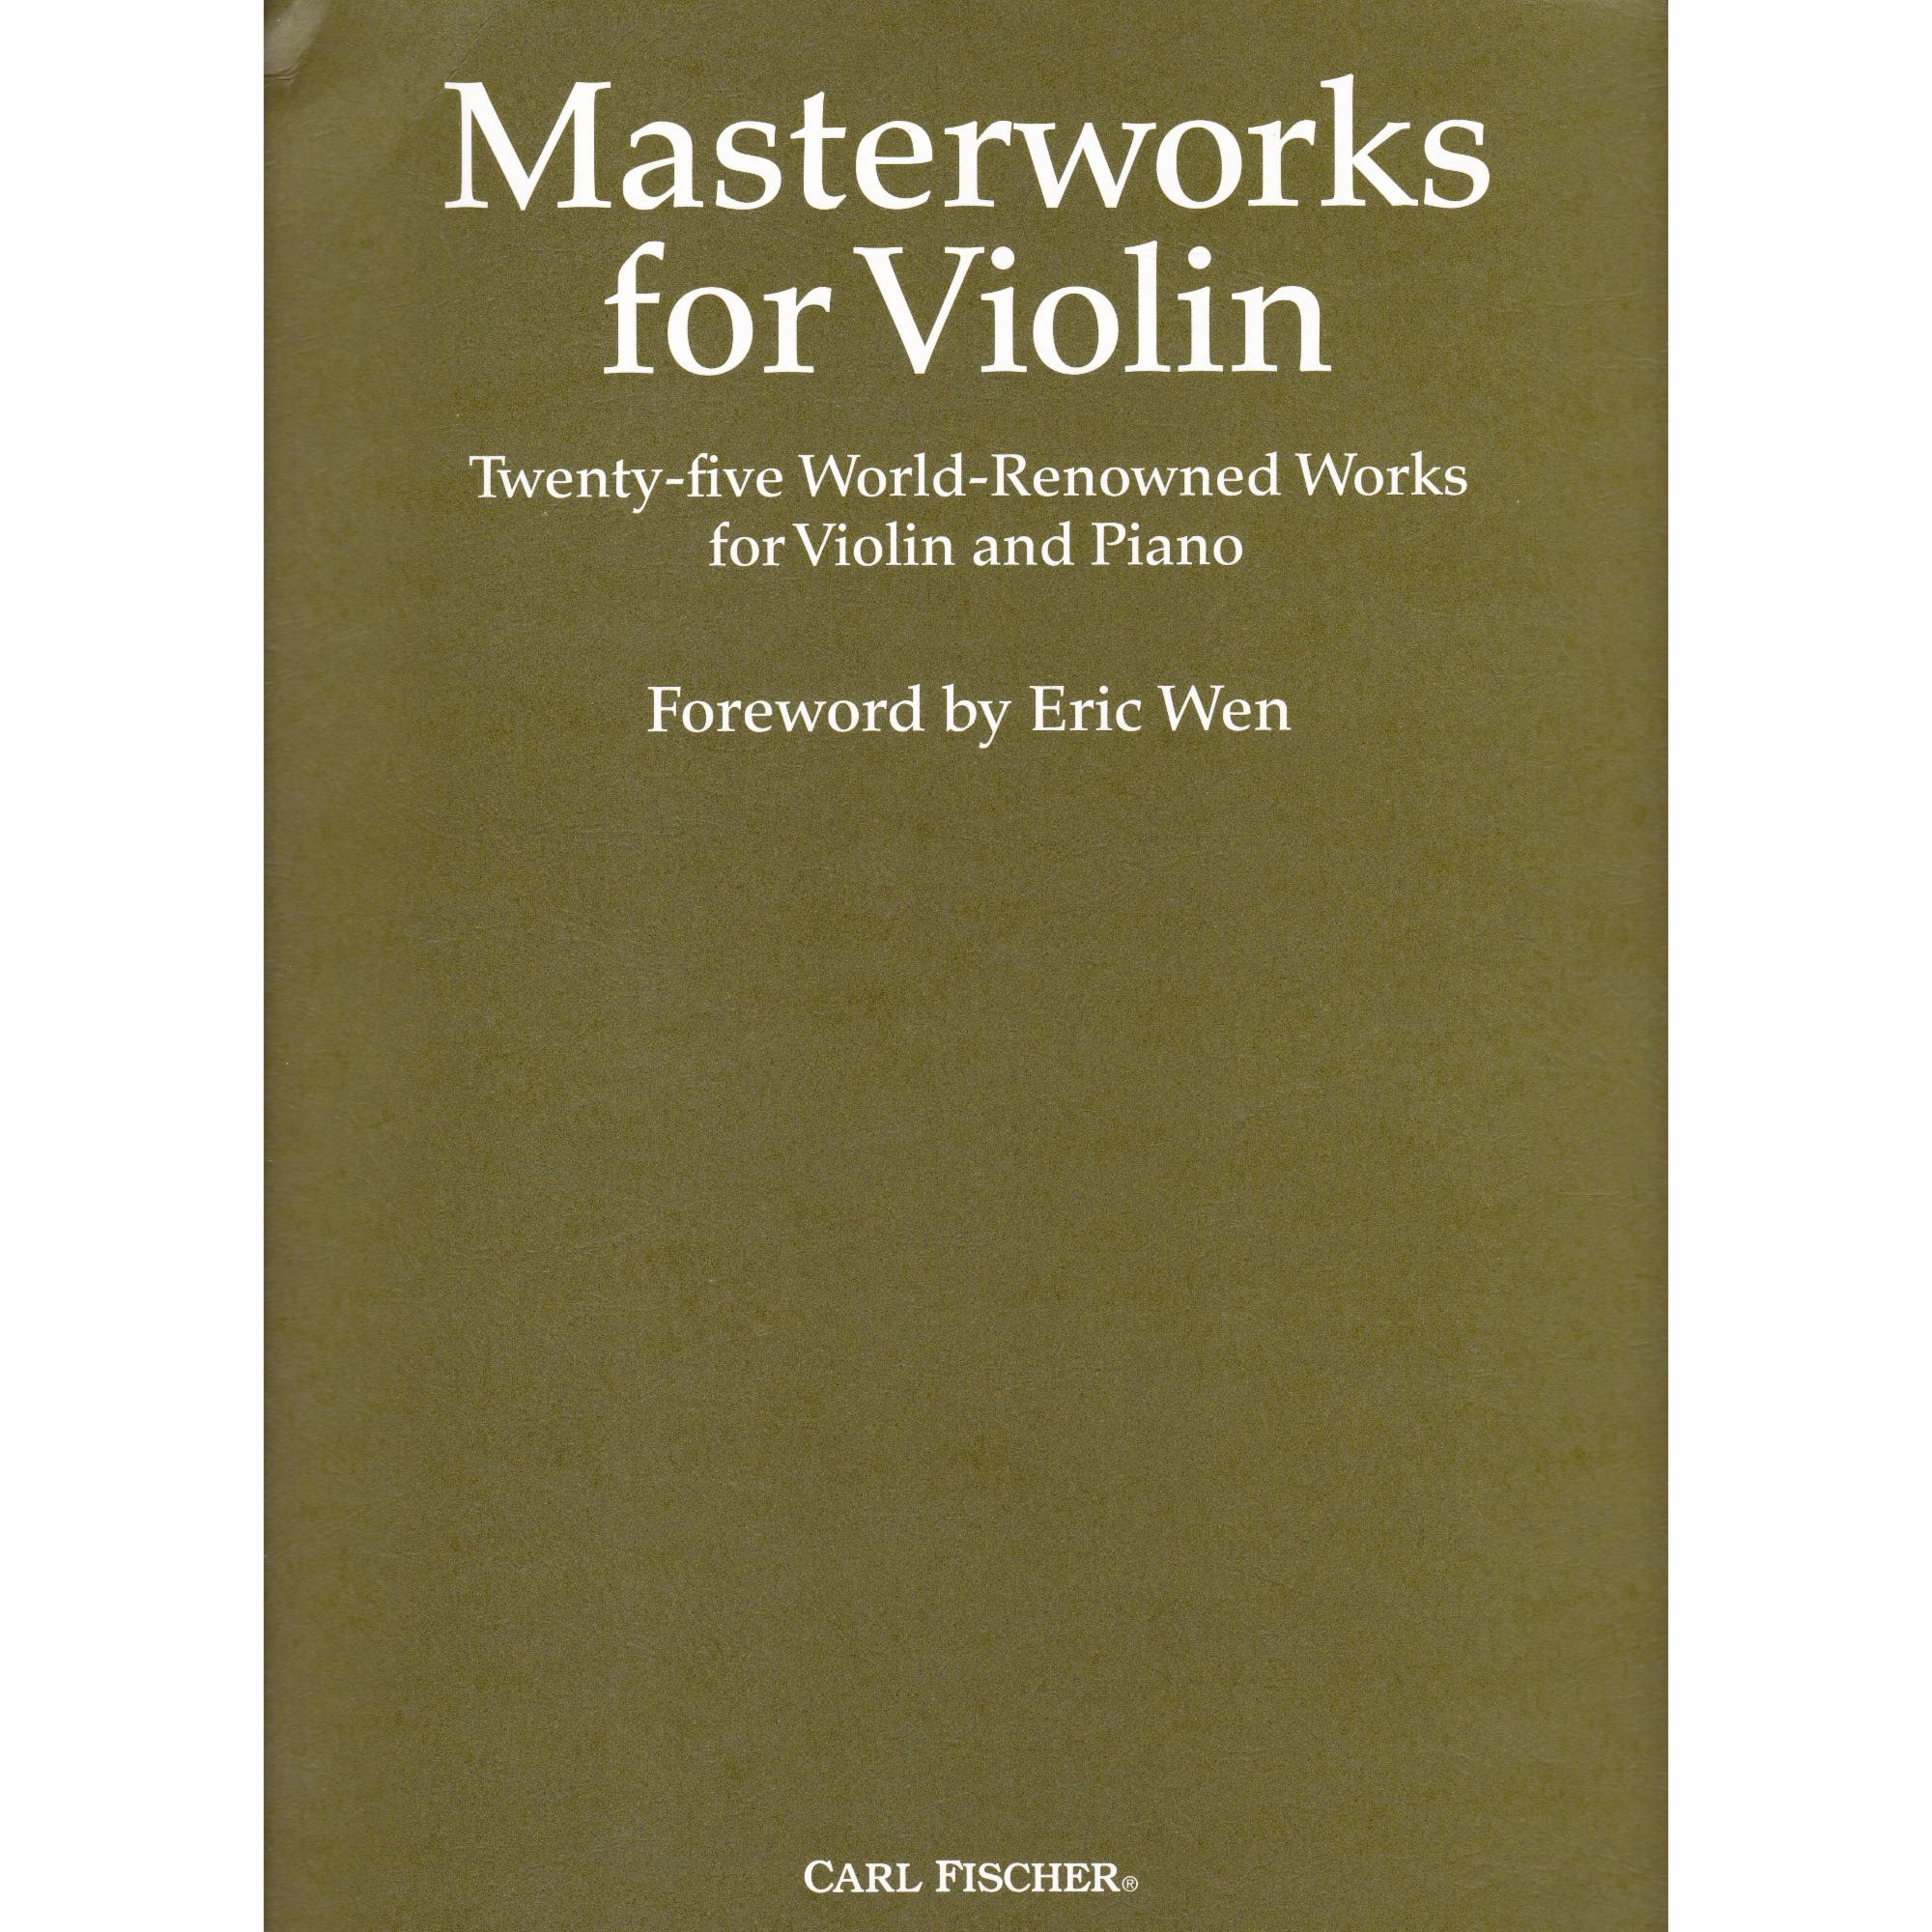 Masterworks for Violin and Piano